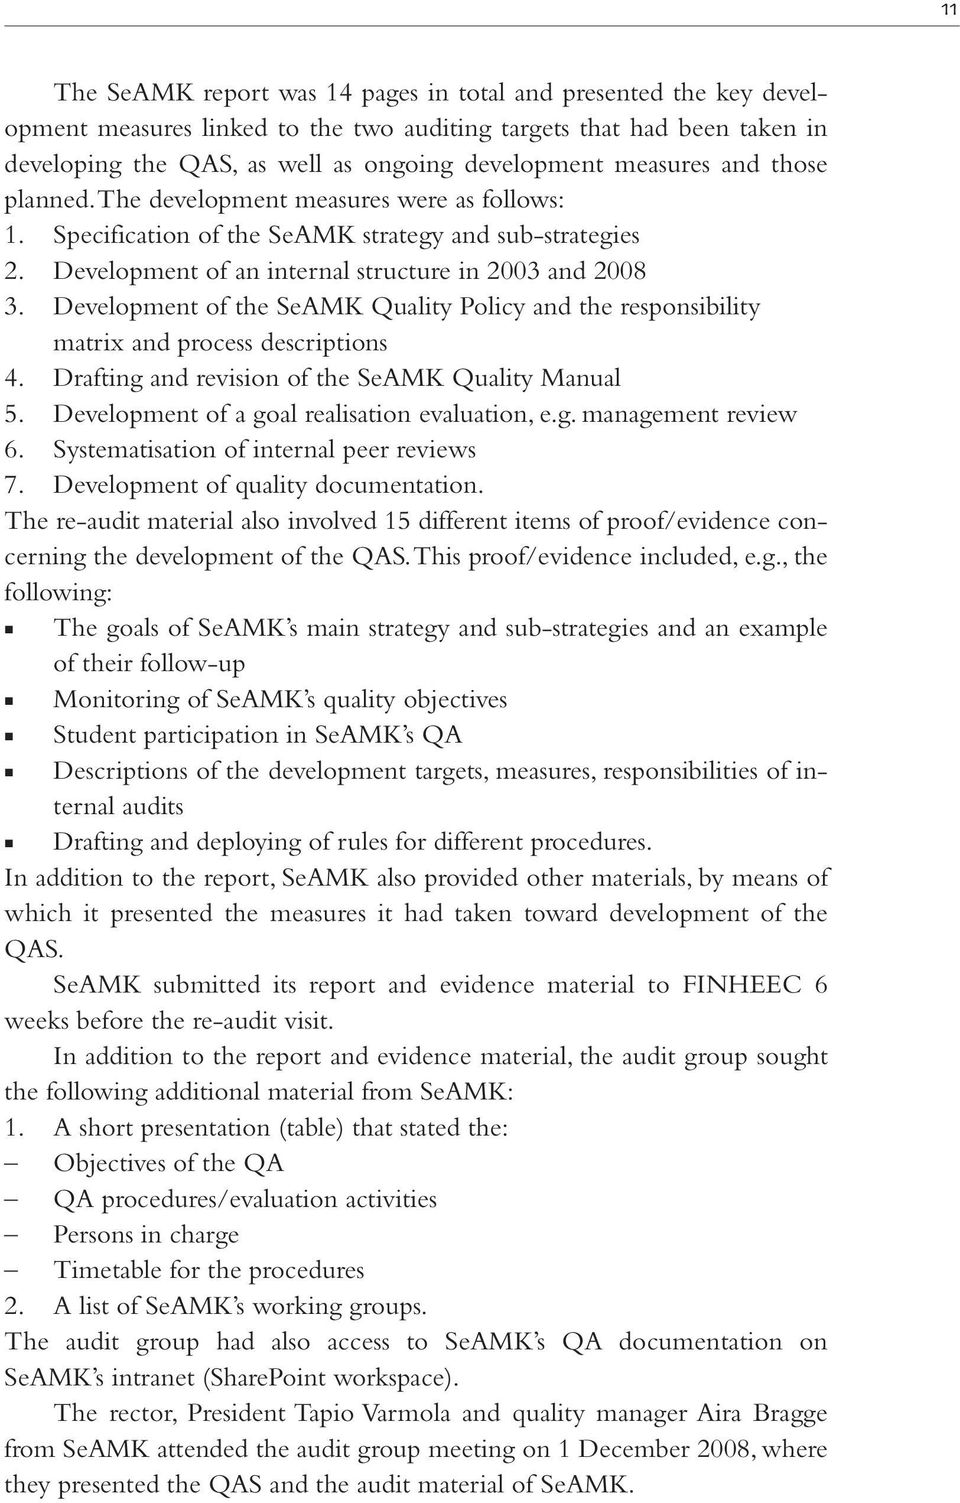 Development of the SeAMK Quality Policy and the responsibility matrix and process descriptions 4. Drafting and revision of the SeAMK Quality Manual 5. Development of a goal realisation evaluation, e.